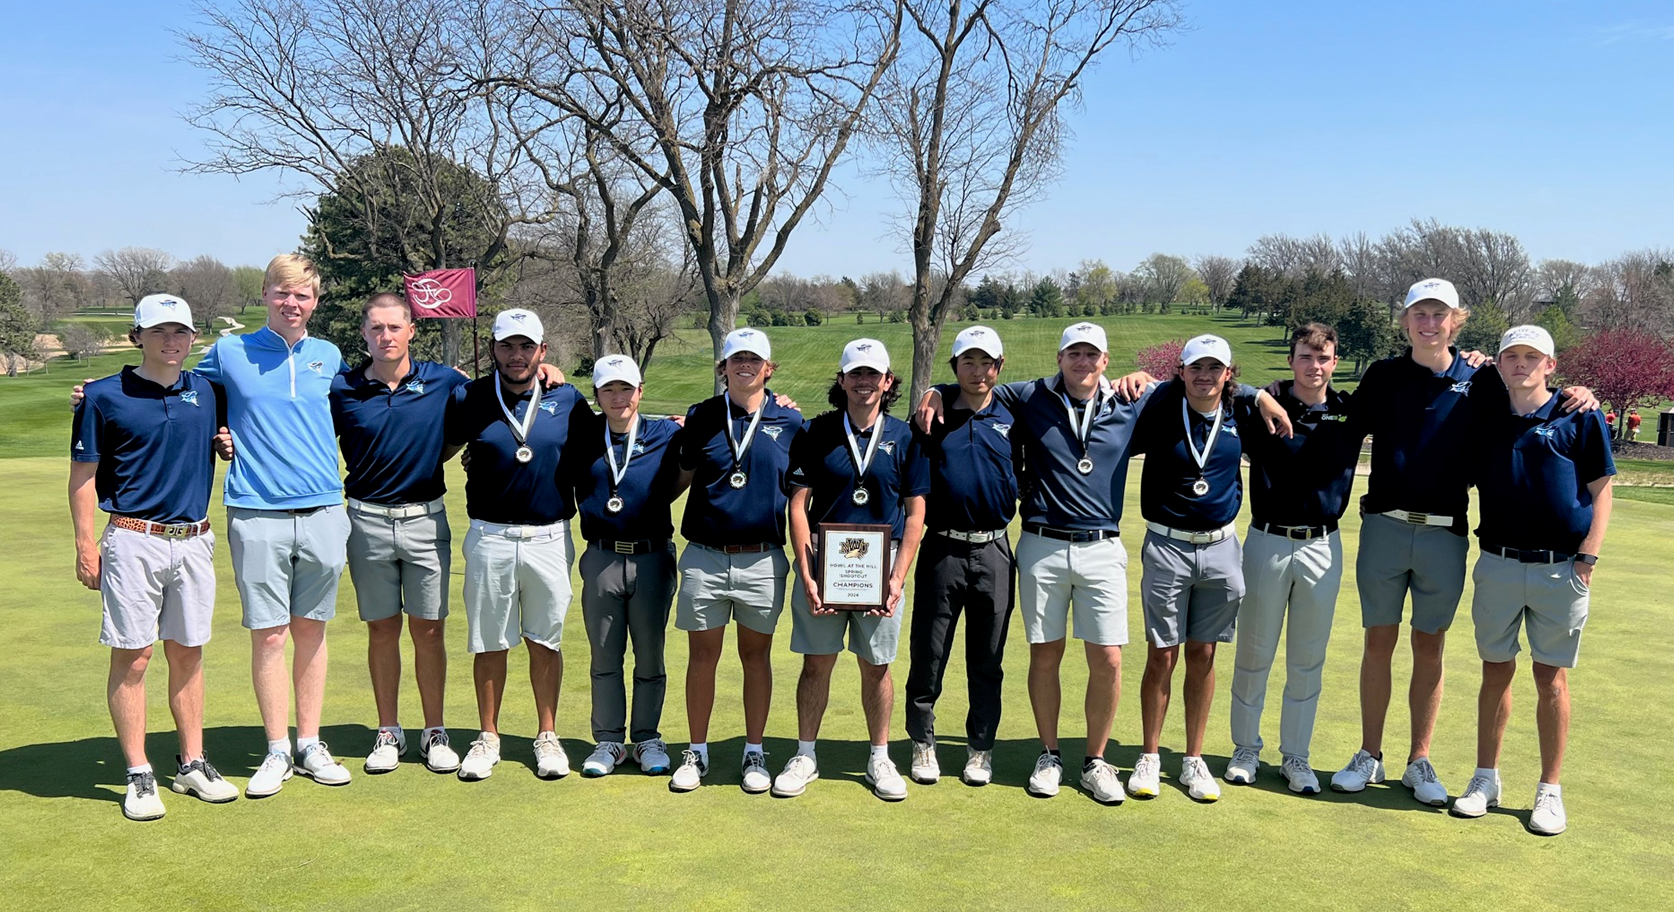 REIVERS FINISH 1st & 2nd AT THE HOWL AT THE HILL; KOSMICKI EARNS THE INDIVIDUAL TITLE!